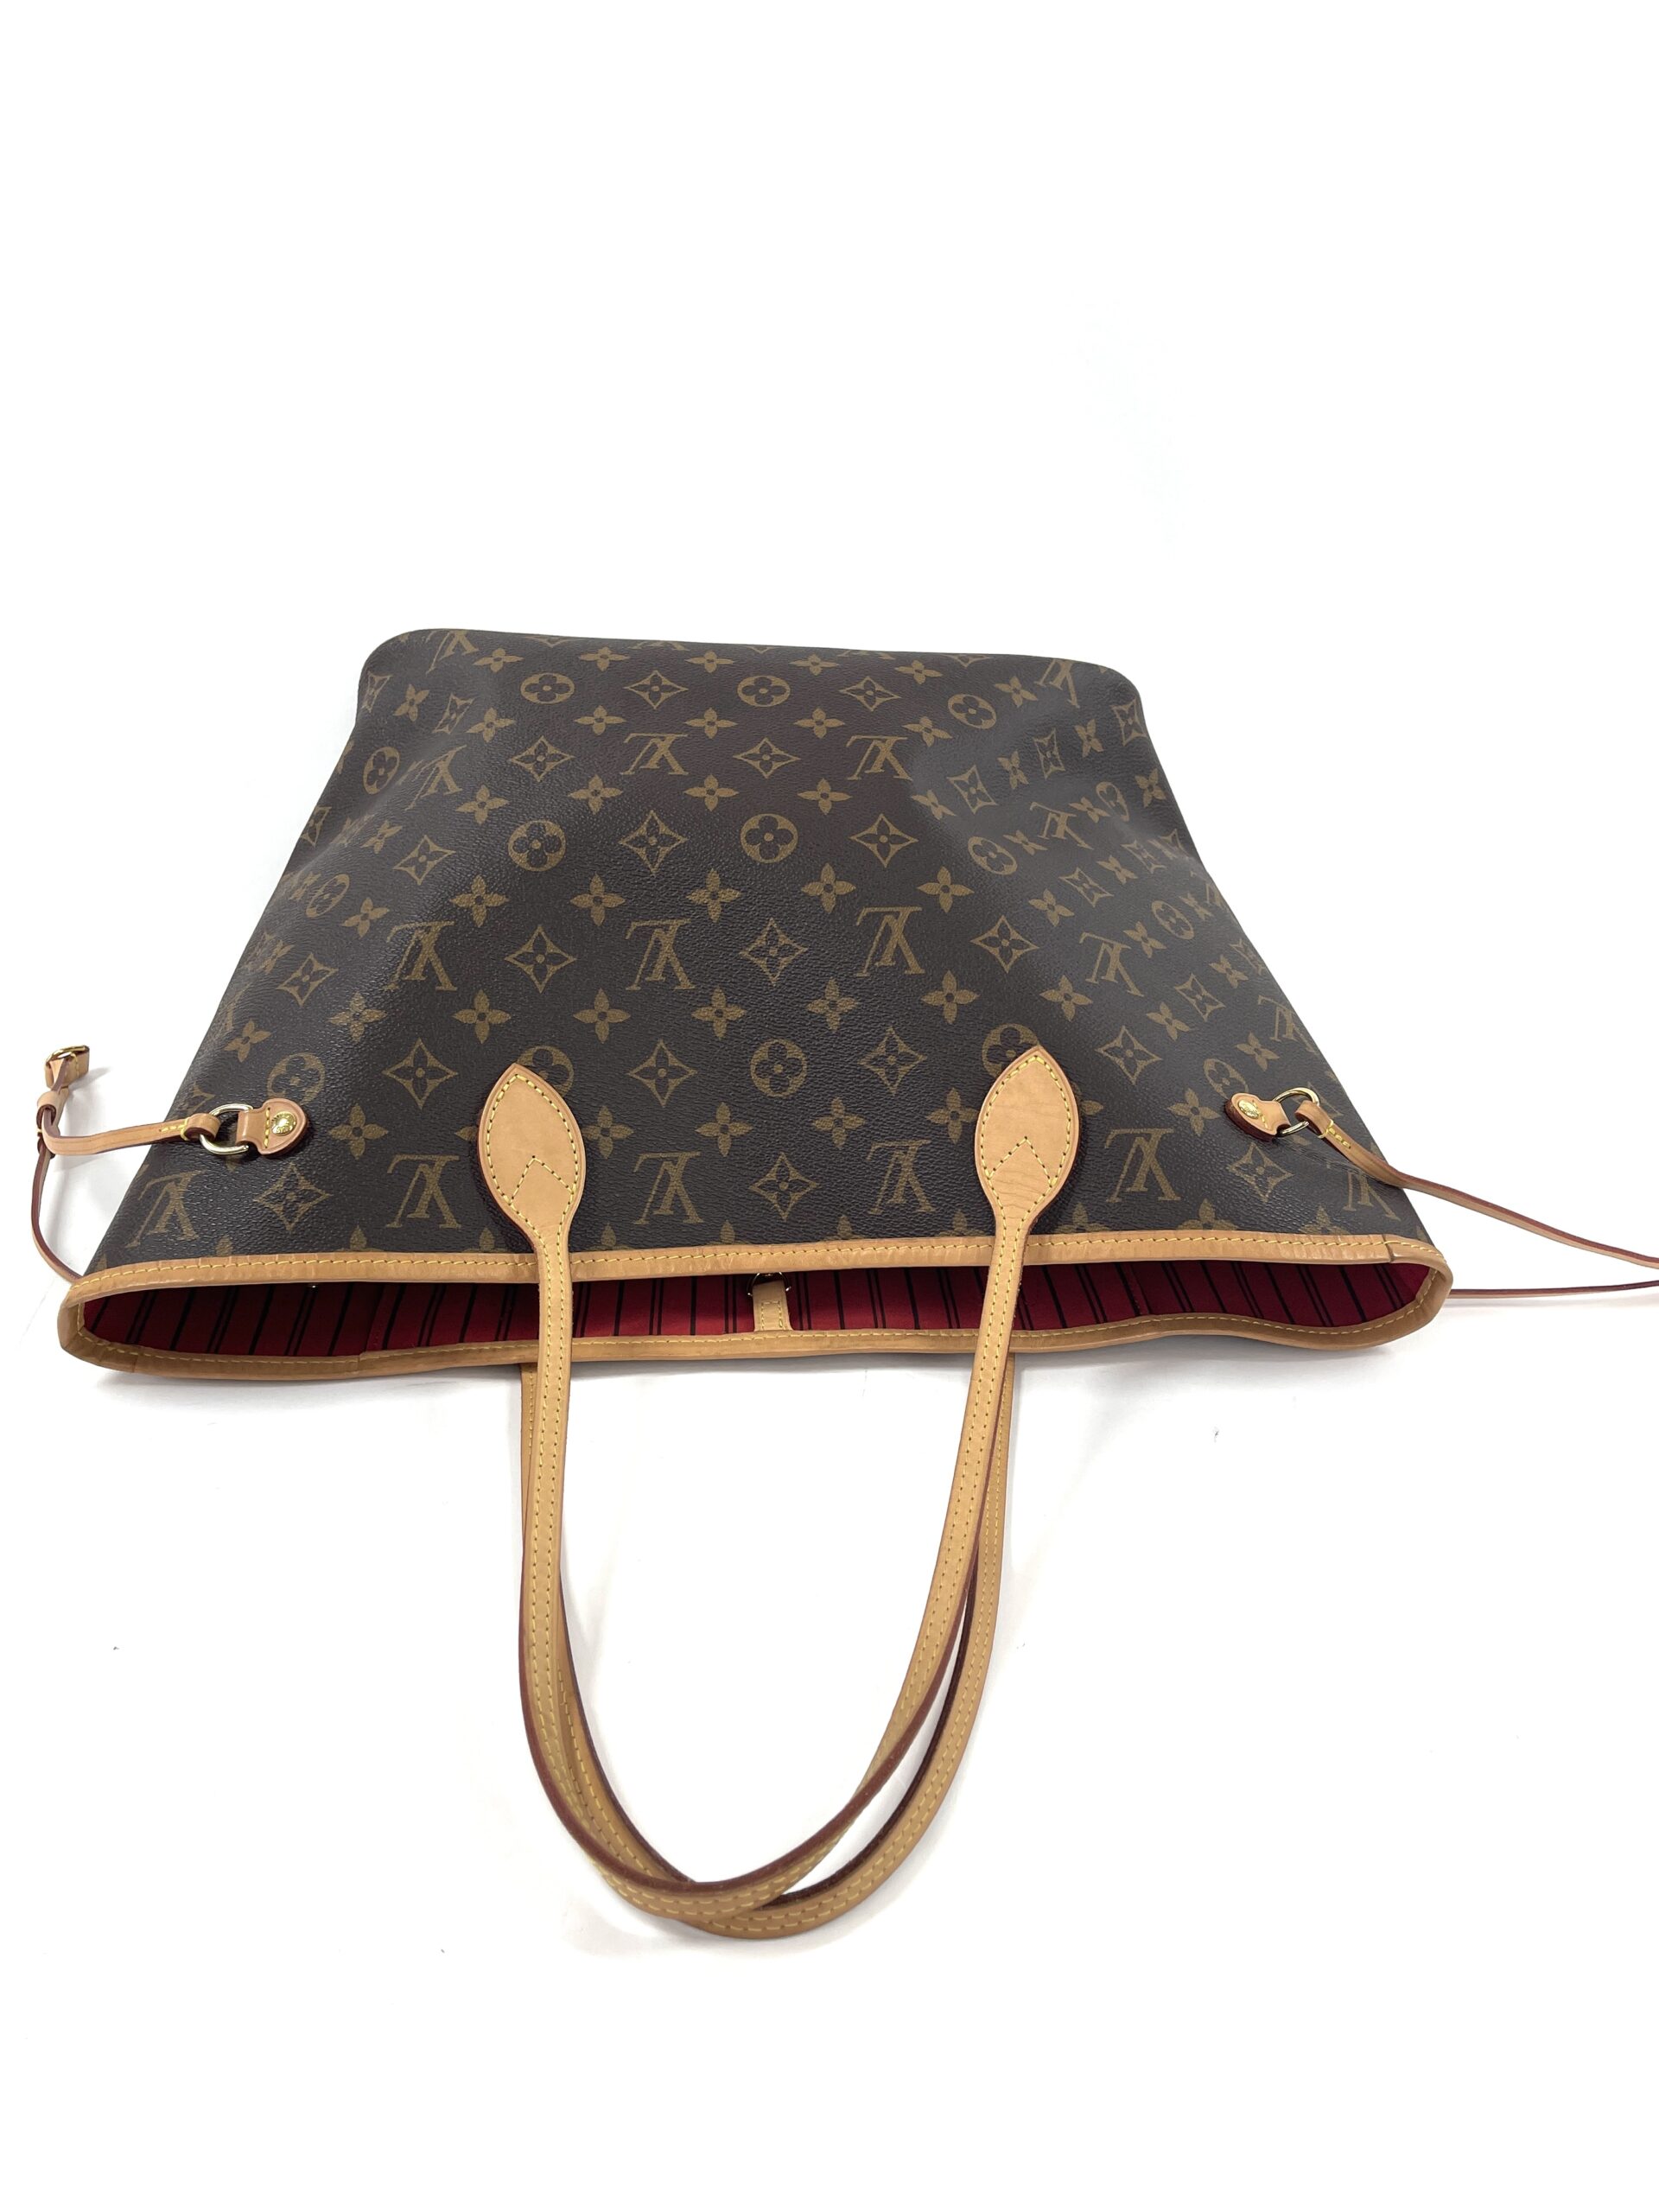 Louis Vuitton Red, Black, and White Giant Monogram Crafty Coated Canvas Neverfull mm Gold Hardware, 2020, Black/Red/White Womens Handbag